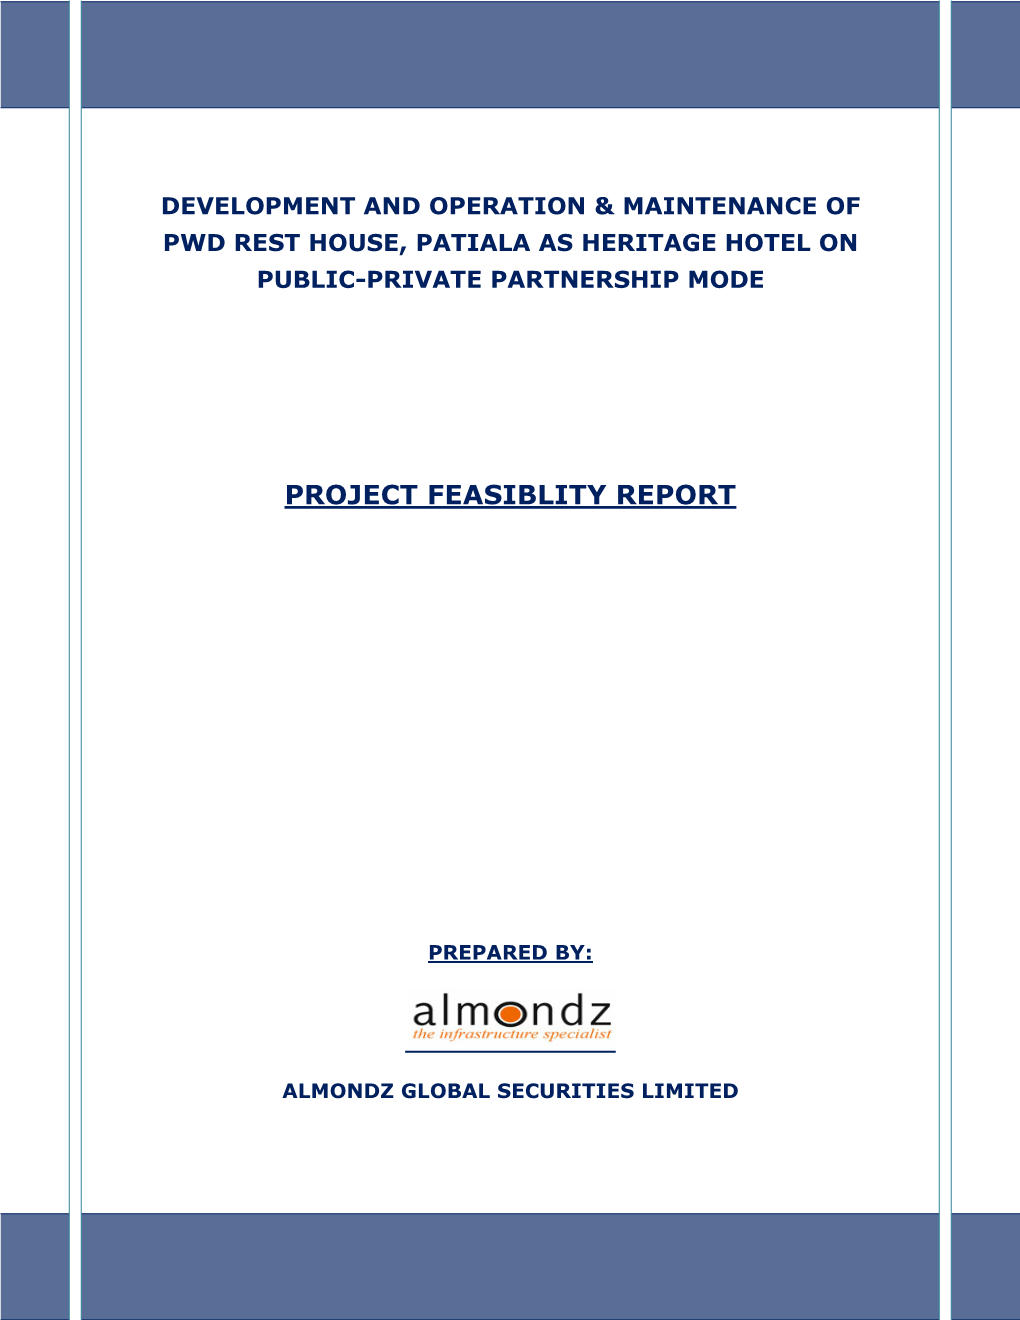 Project Feasiblity Report